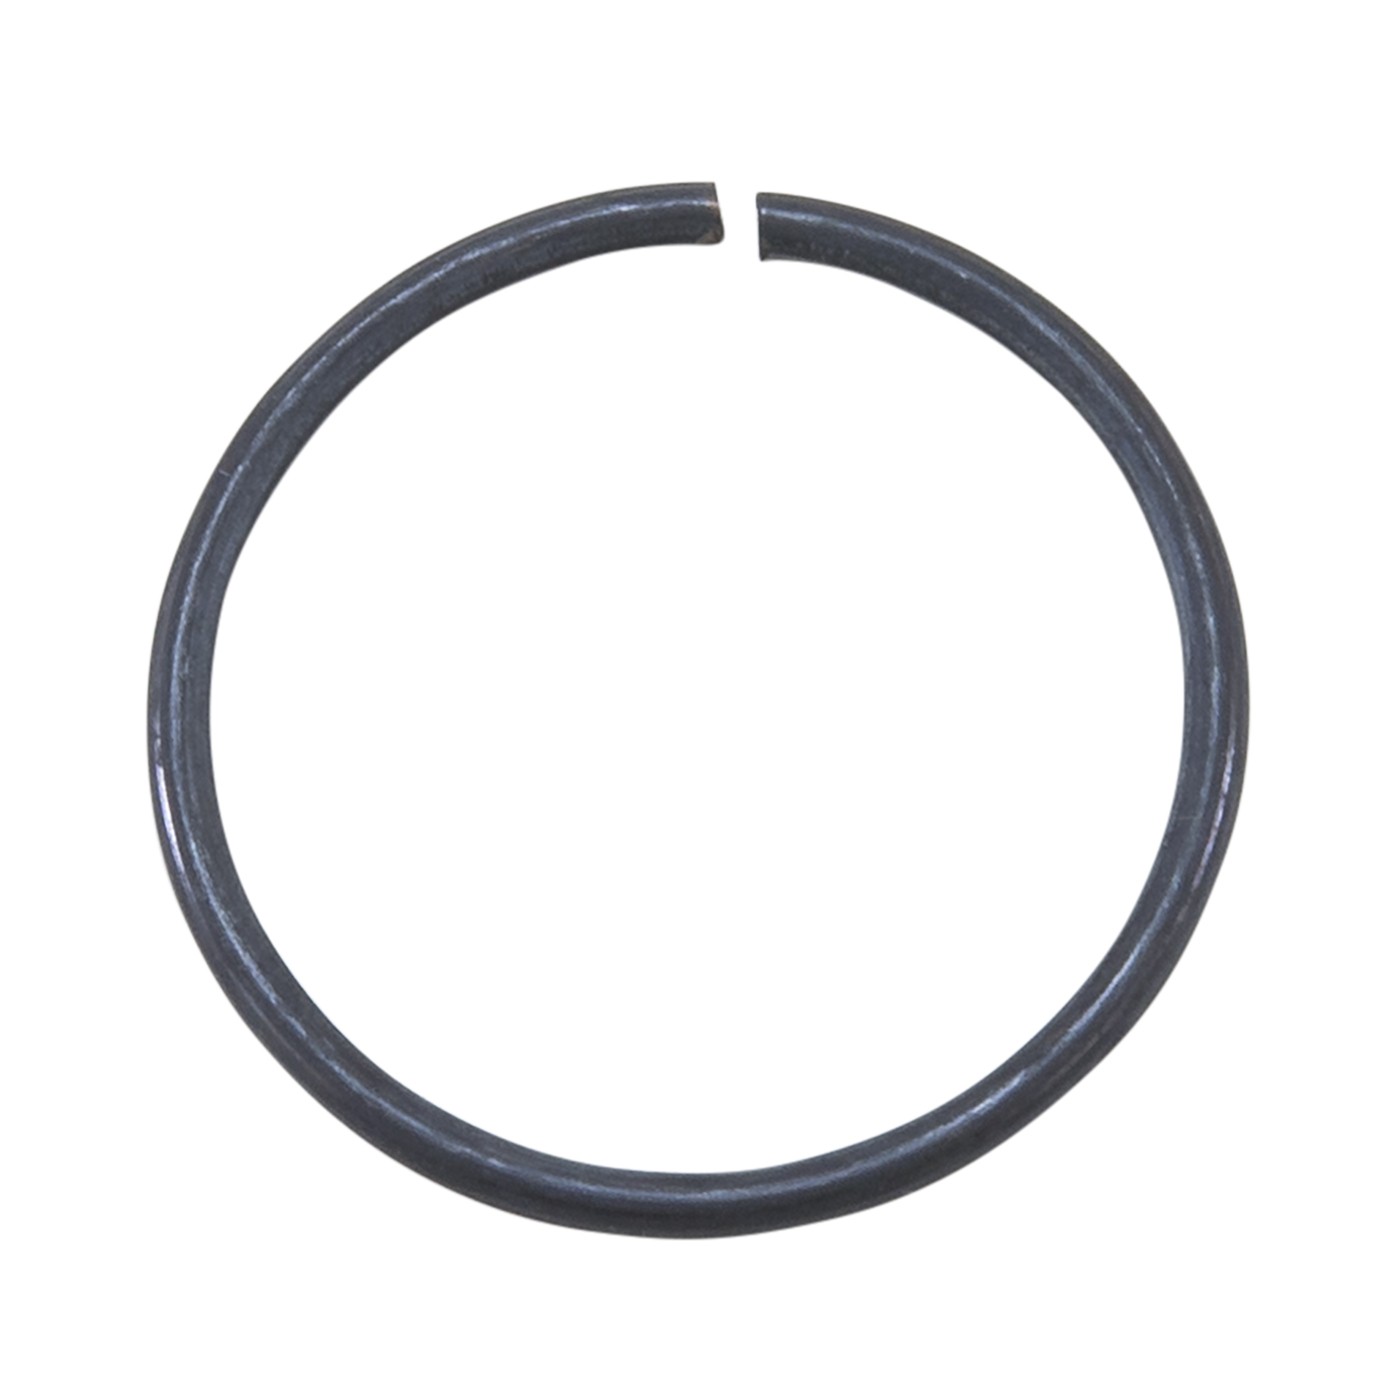 Stub axle retaining clip snap ring for 8.25" GM IFS 